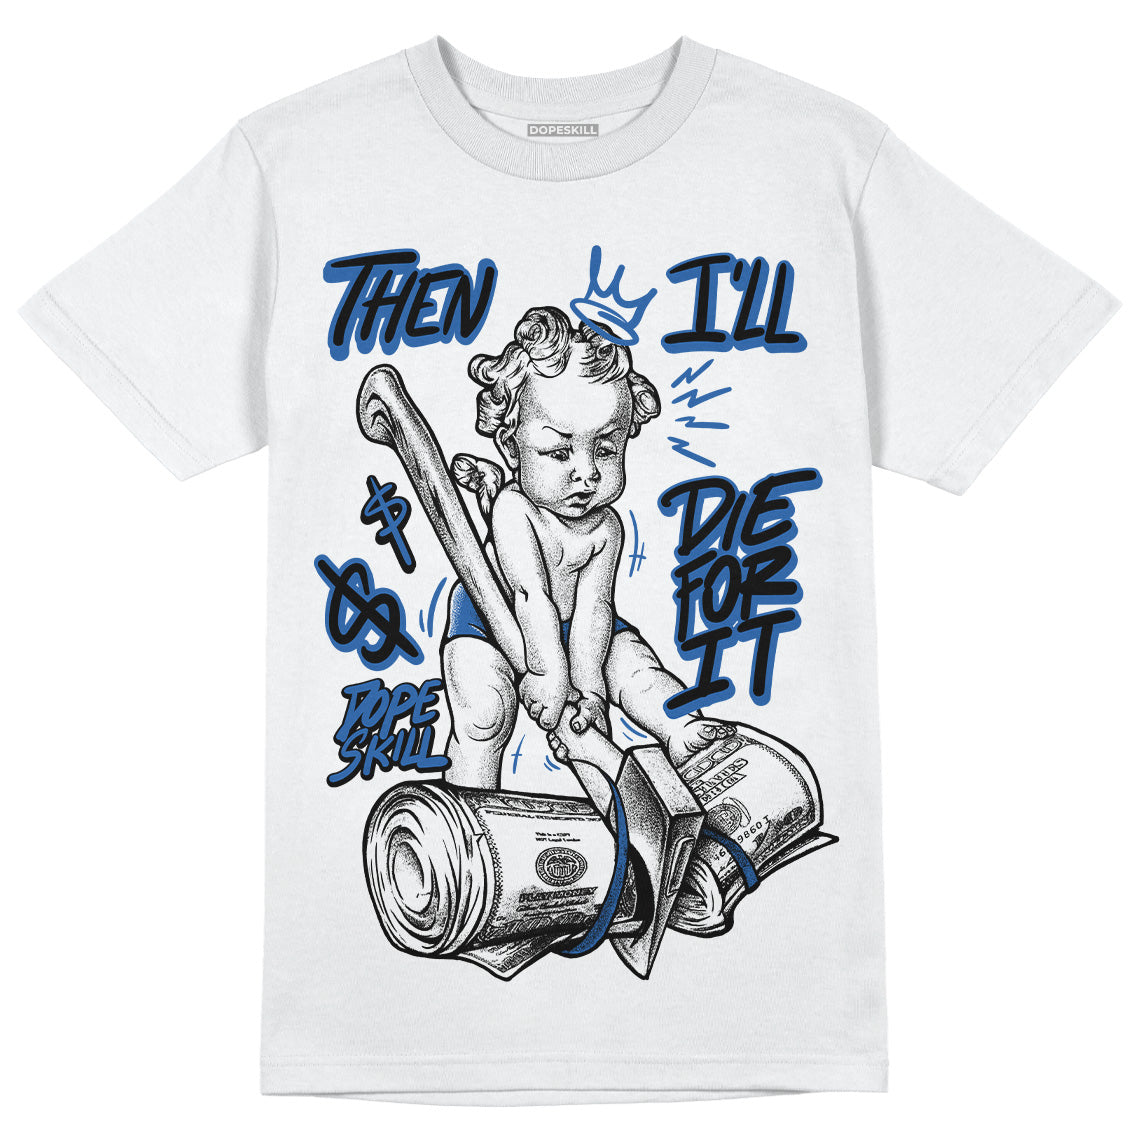 Jordan 11 Low “Space Jam” DopeSkill T-Shirt Then I'll Die For It Graphic Streetwear - White